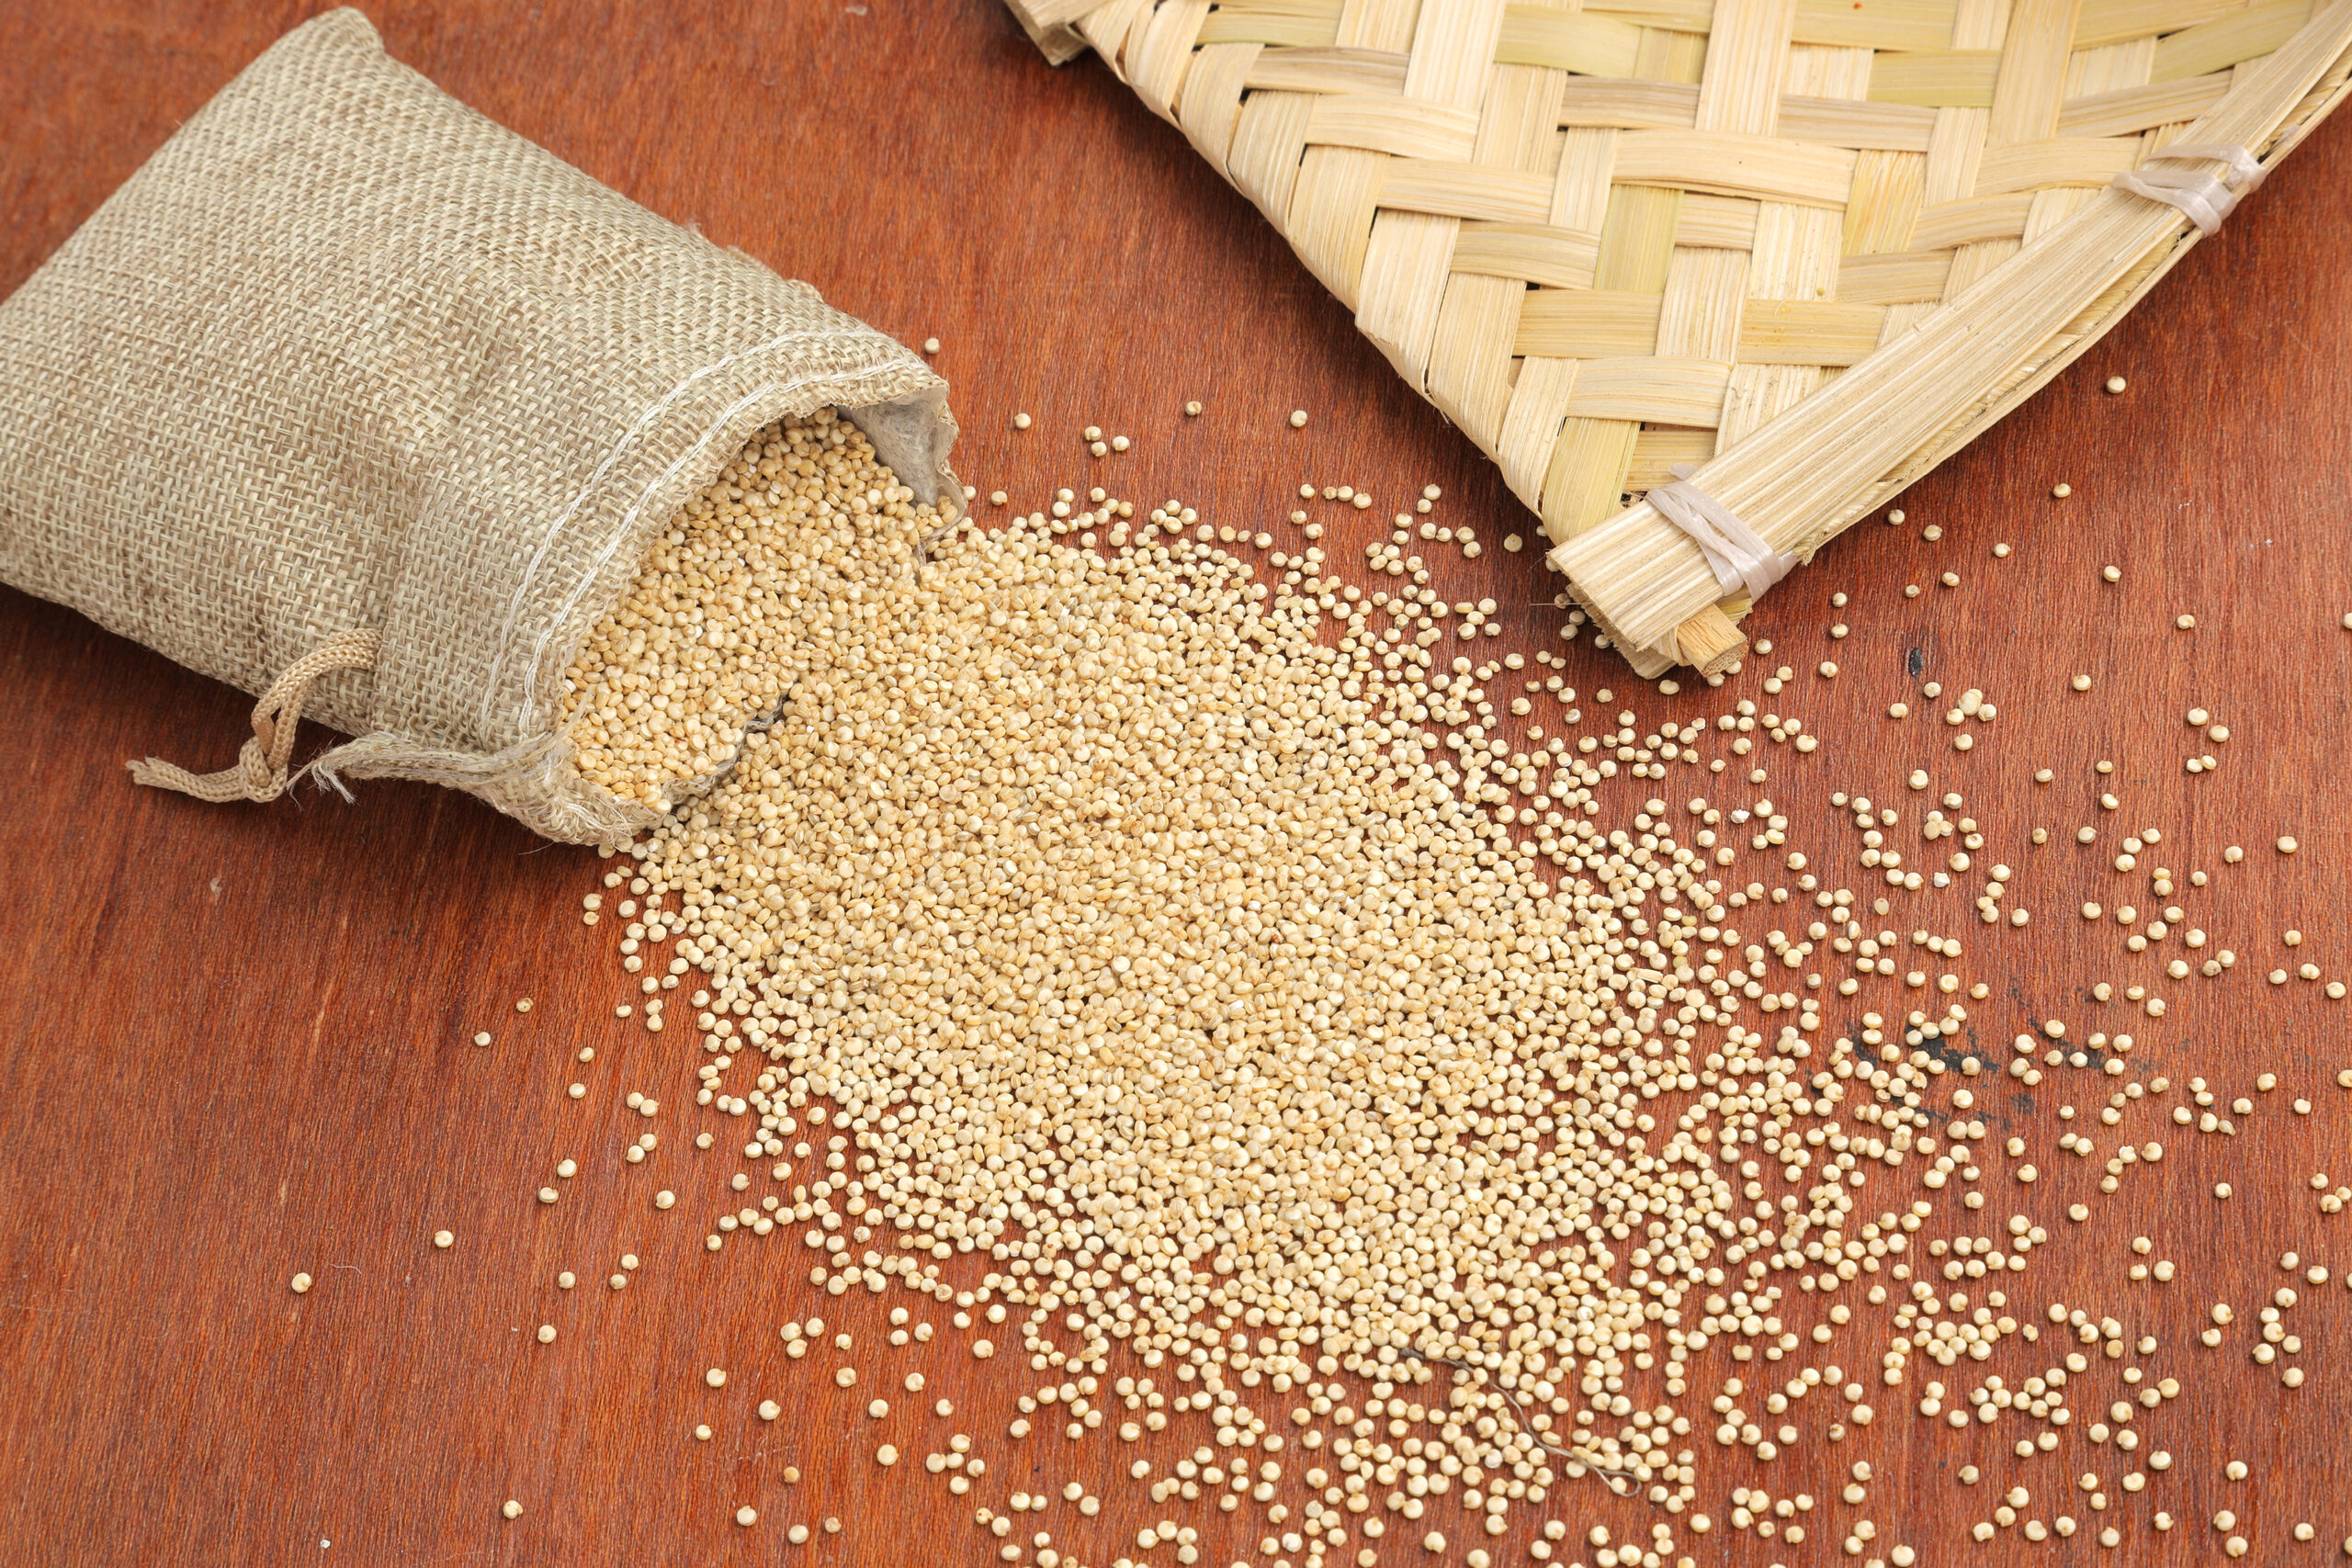  information about little millet in tamil